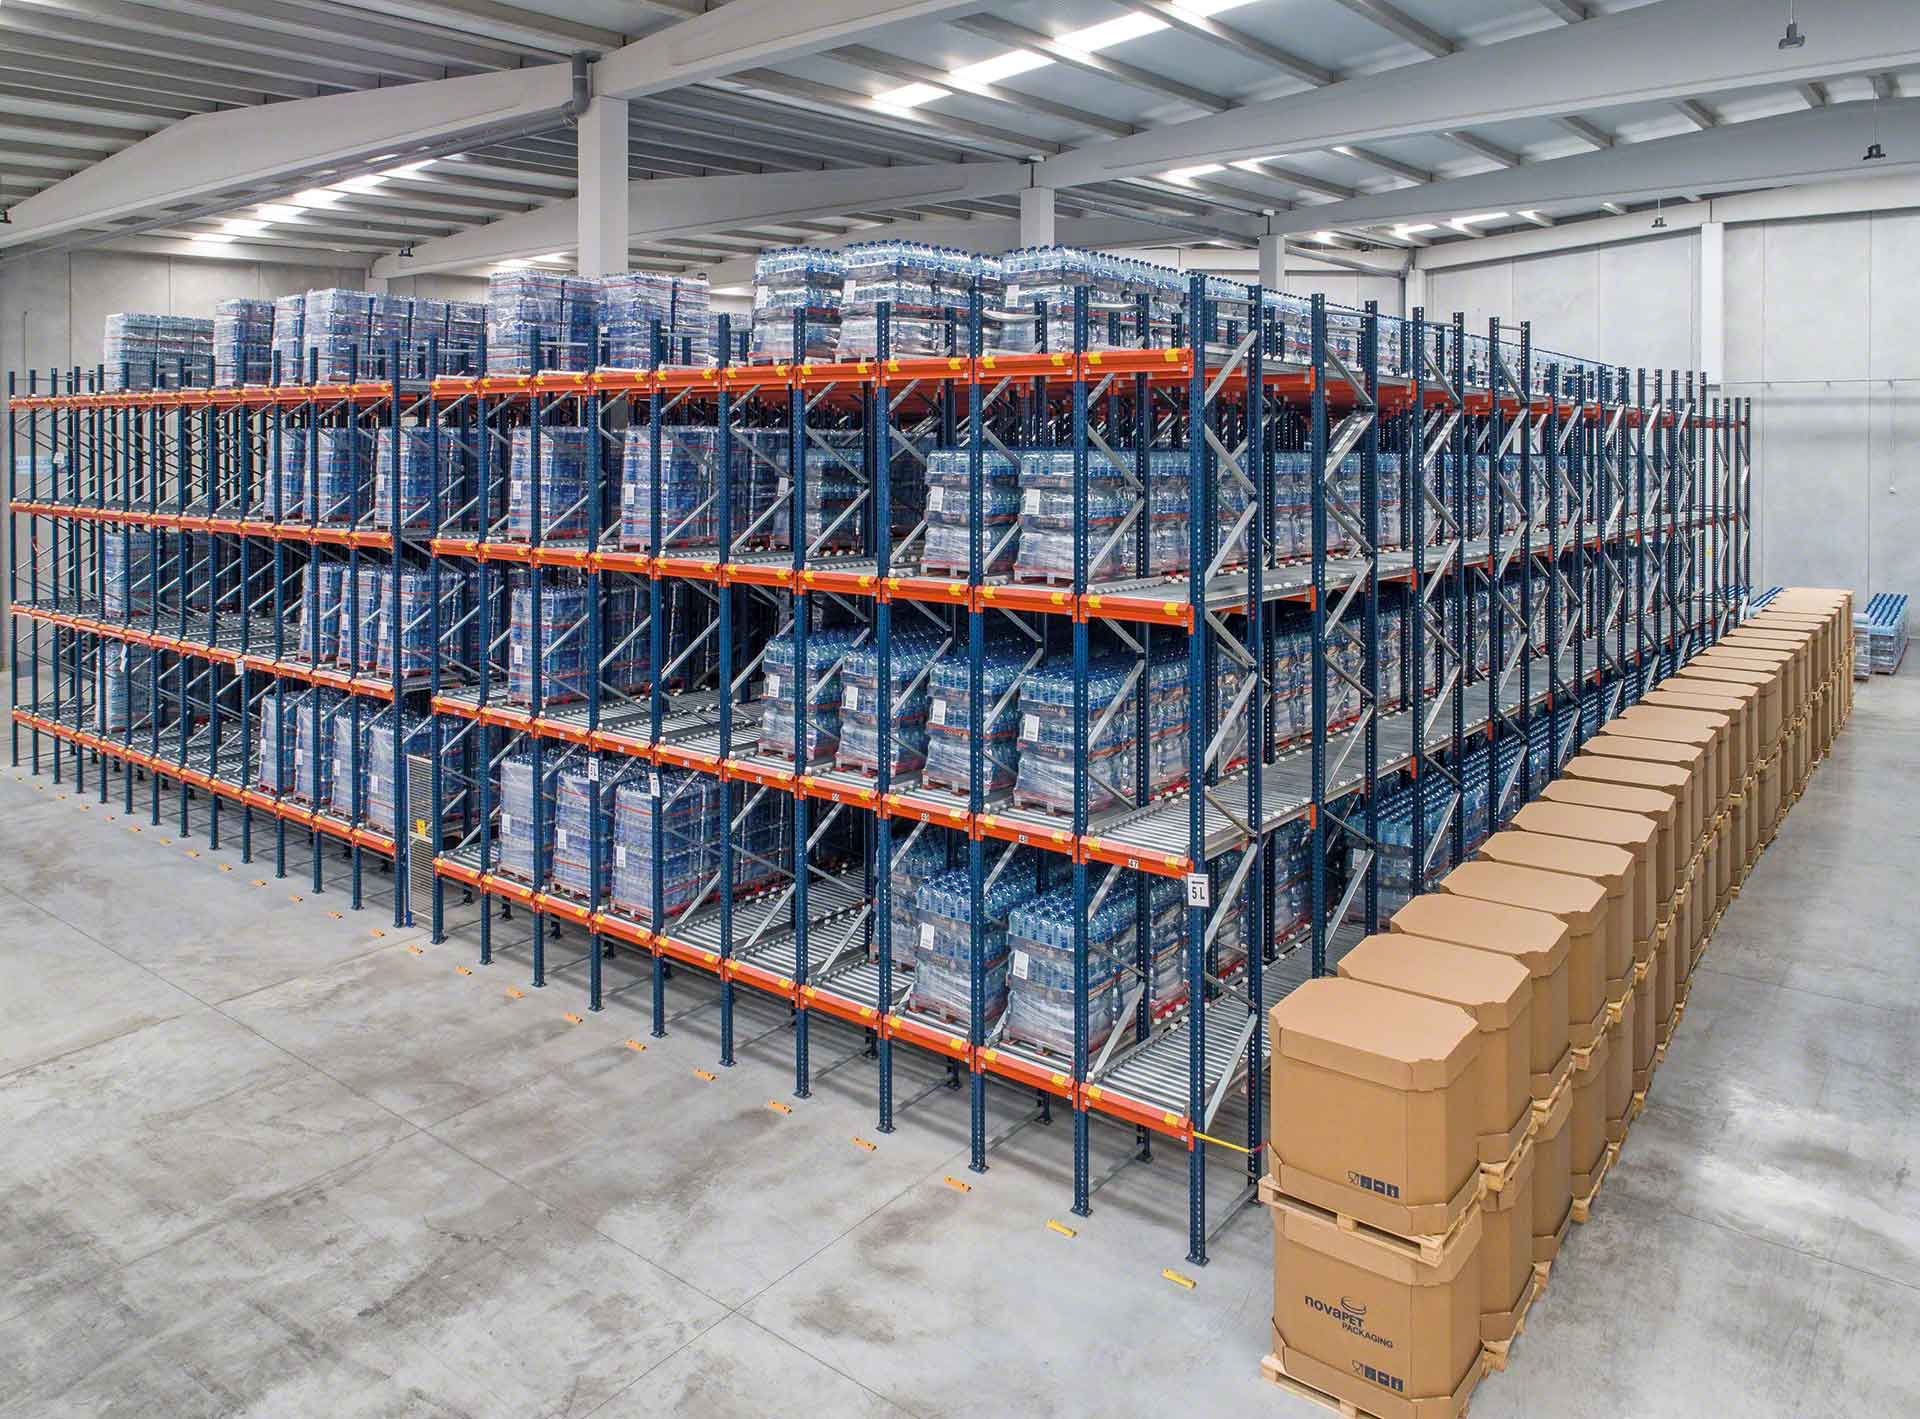 Warehouse equipped with flow racking systems with rollers